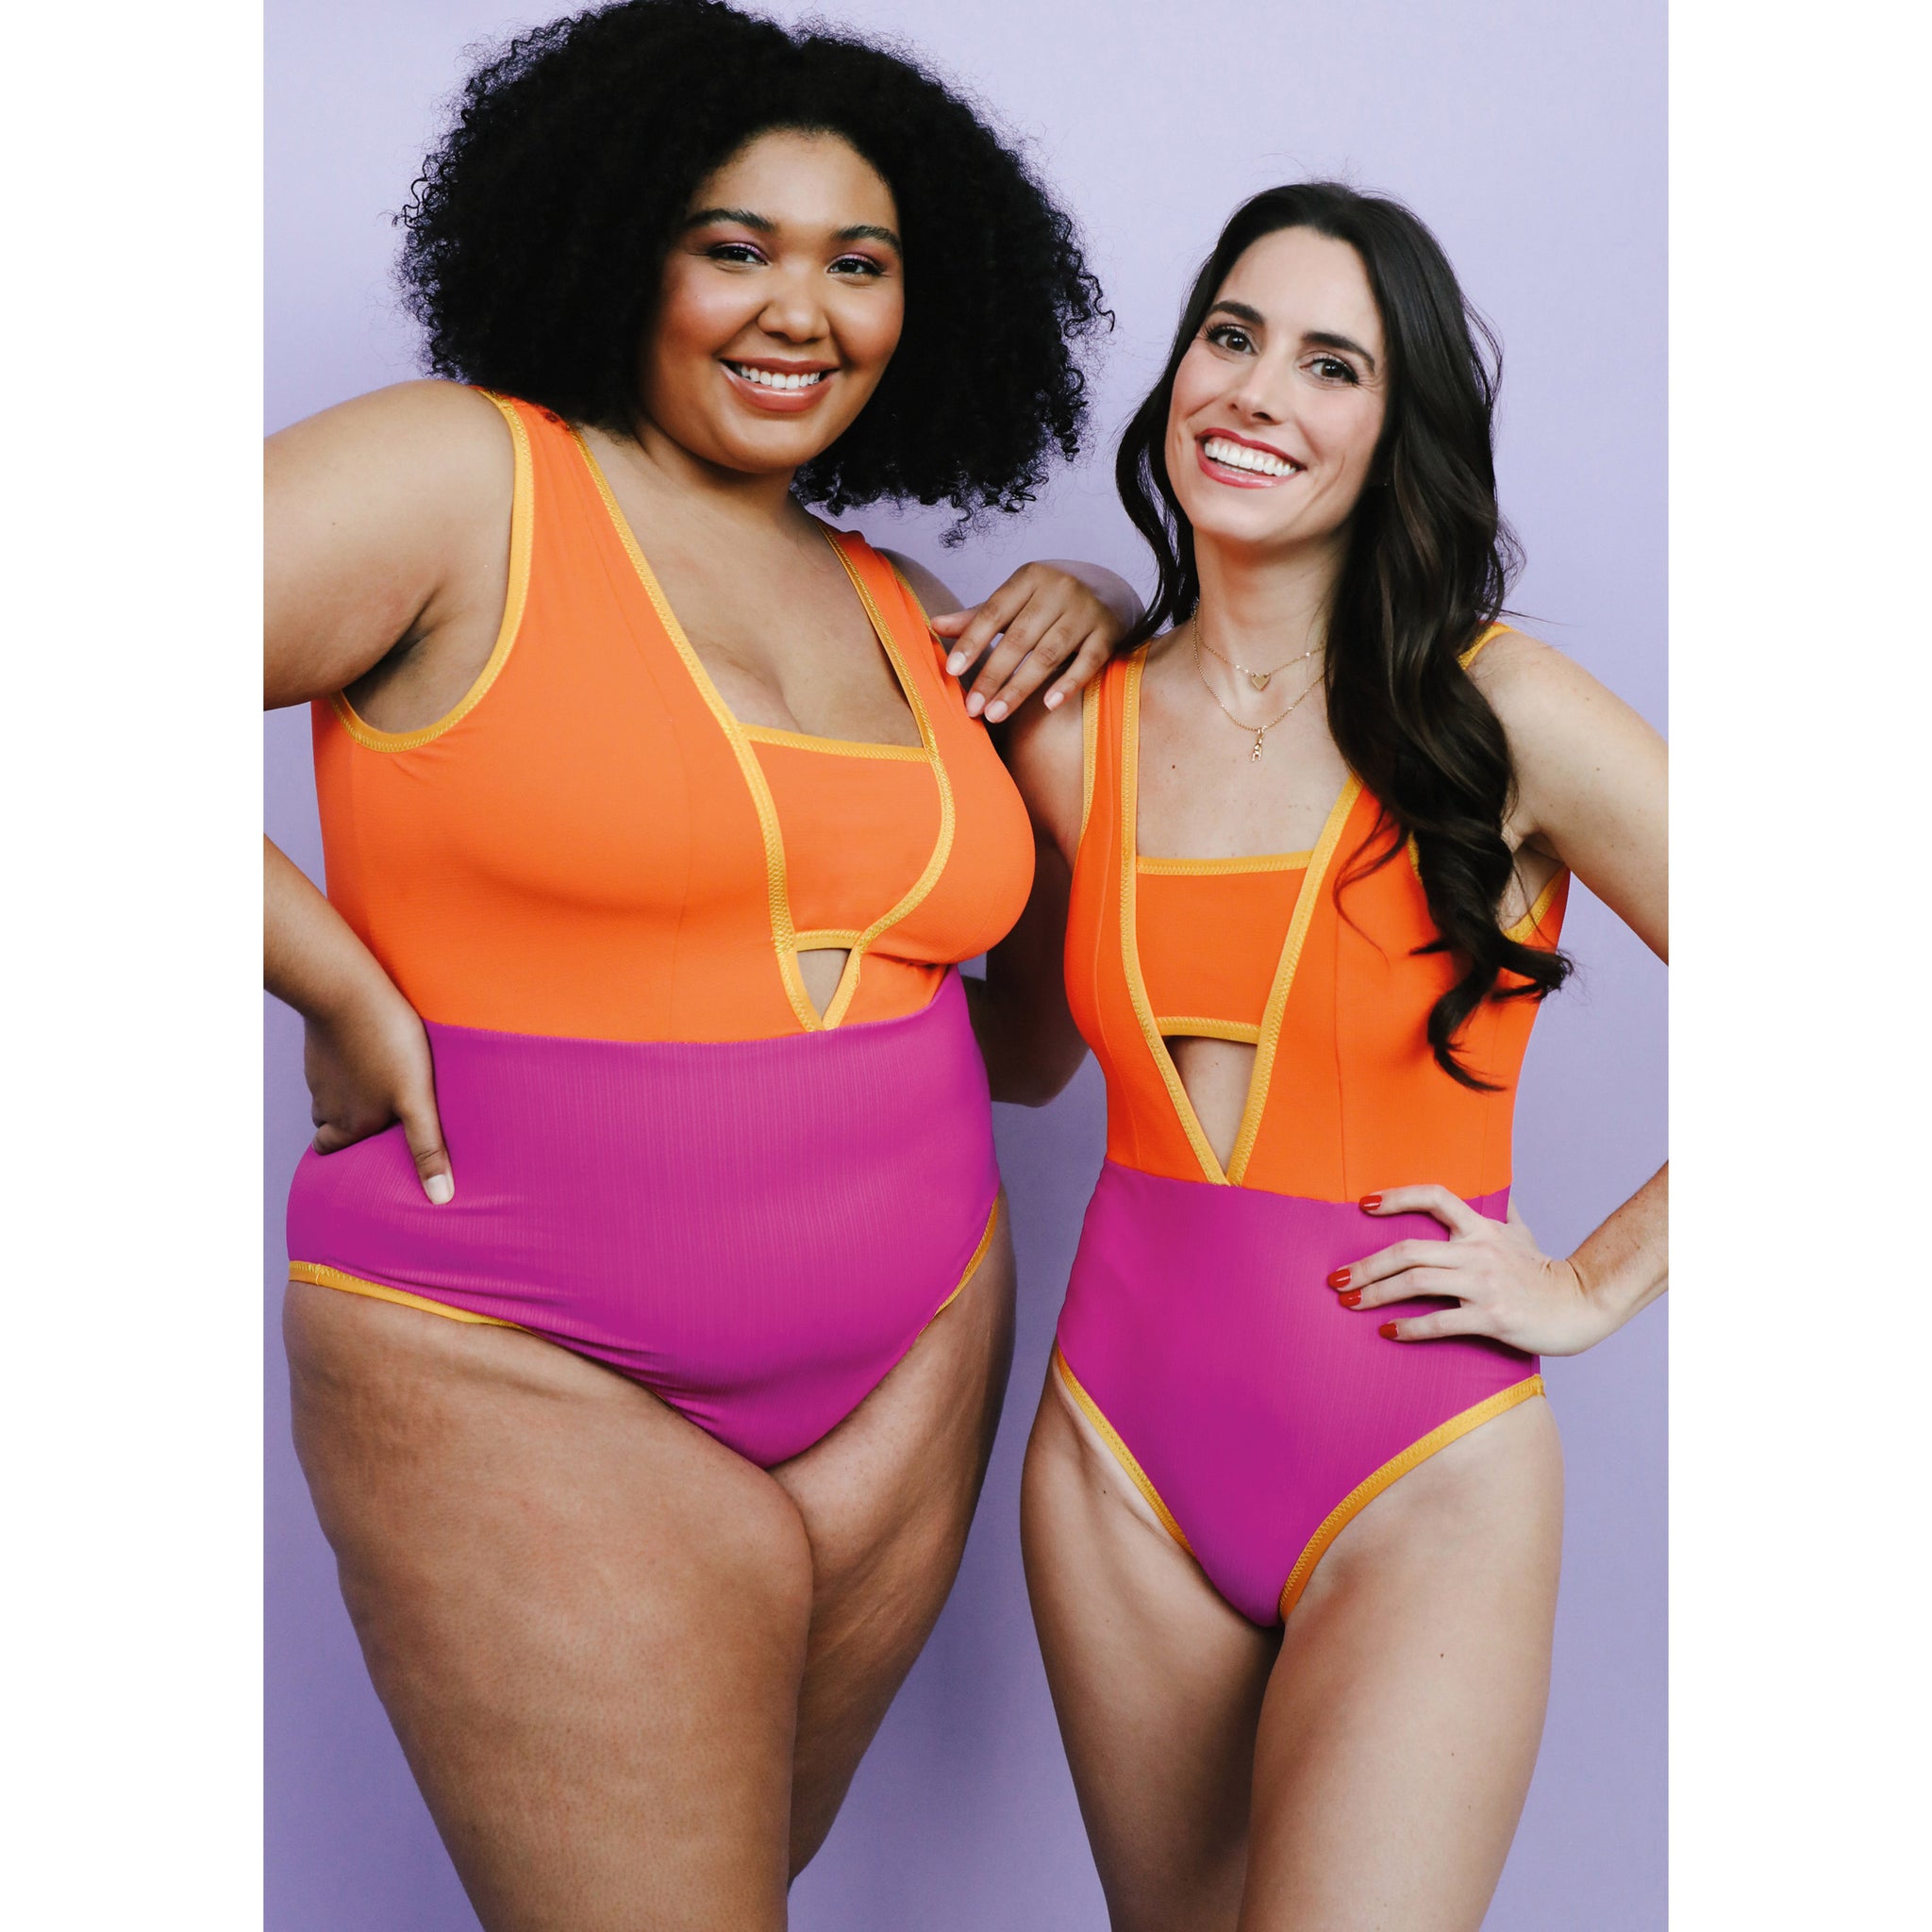 V9192 Misses' Wrap-Top Bikini, One-Piece Swimsuits, and Cover-Ups